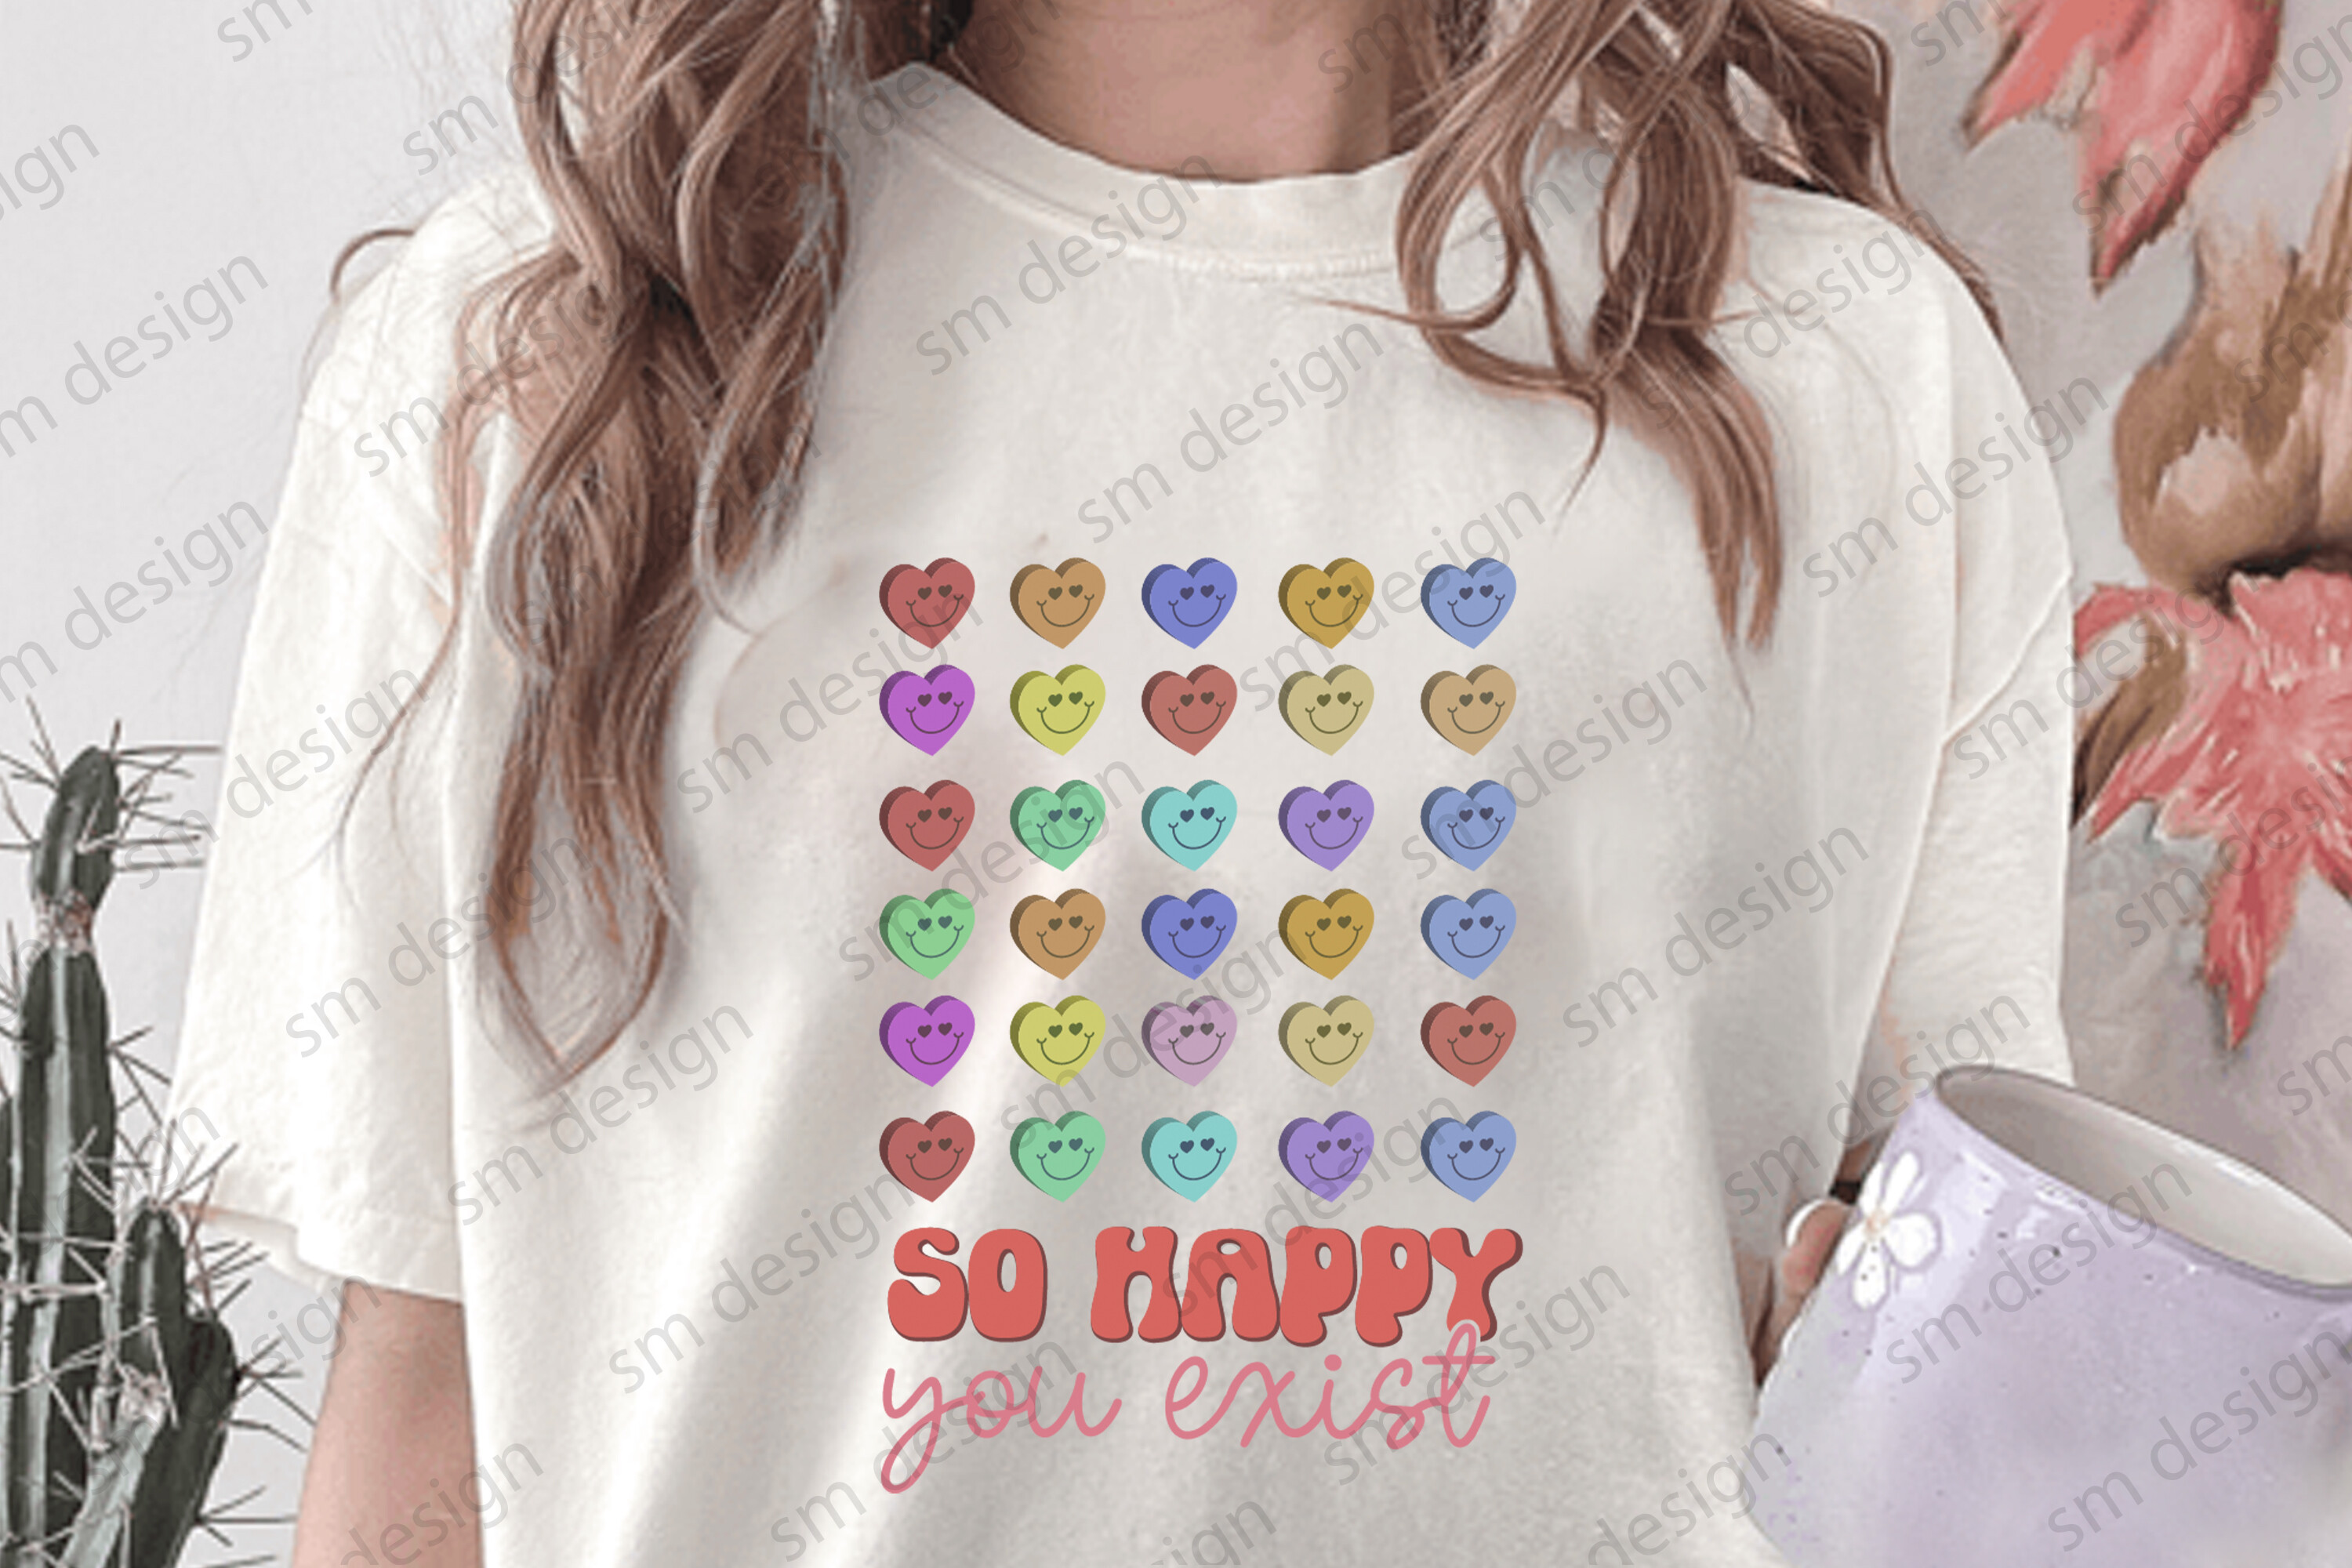 So Happy You Exist Retro Valentine’s Day Graphic by Trendy T shirt ...